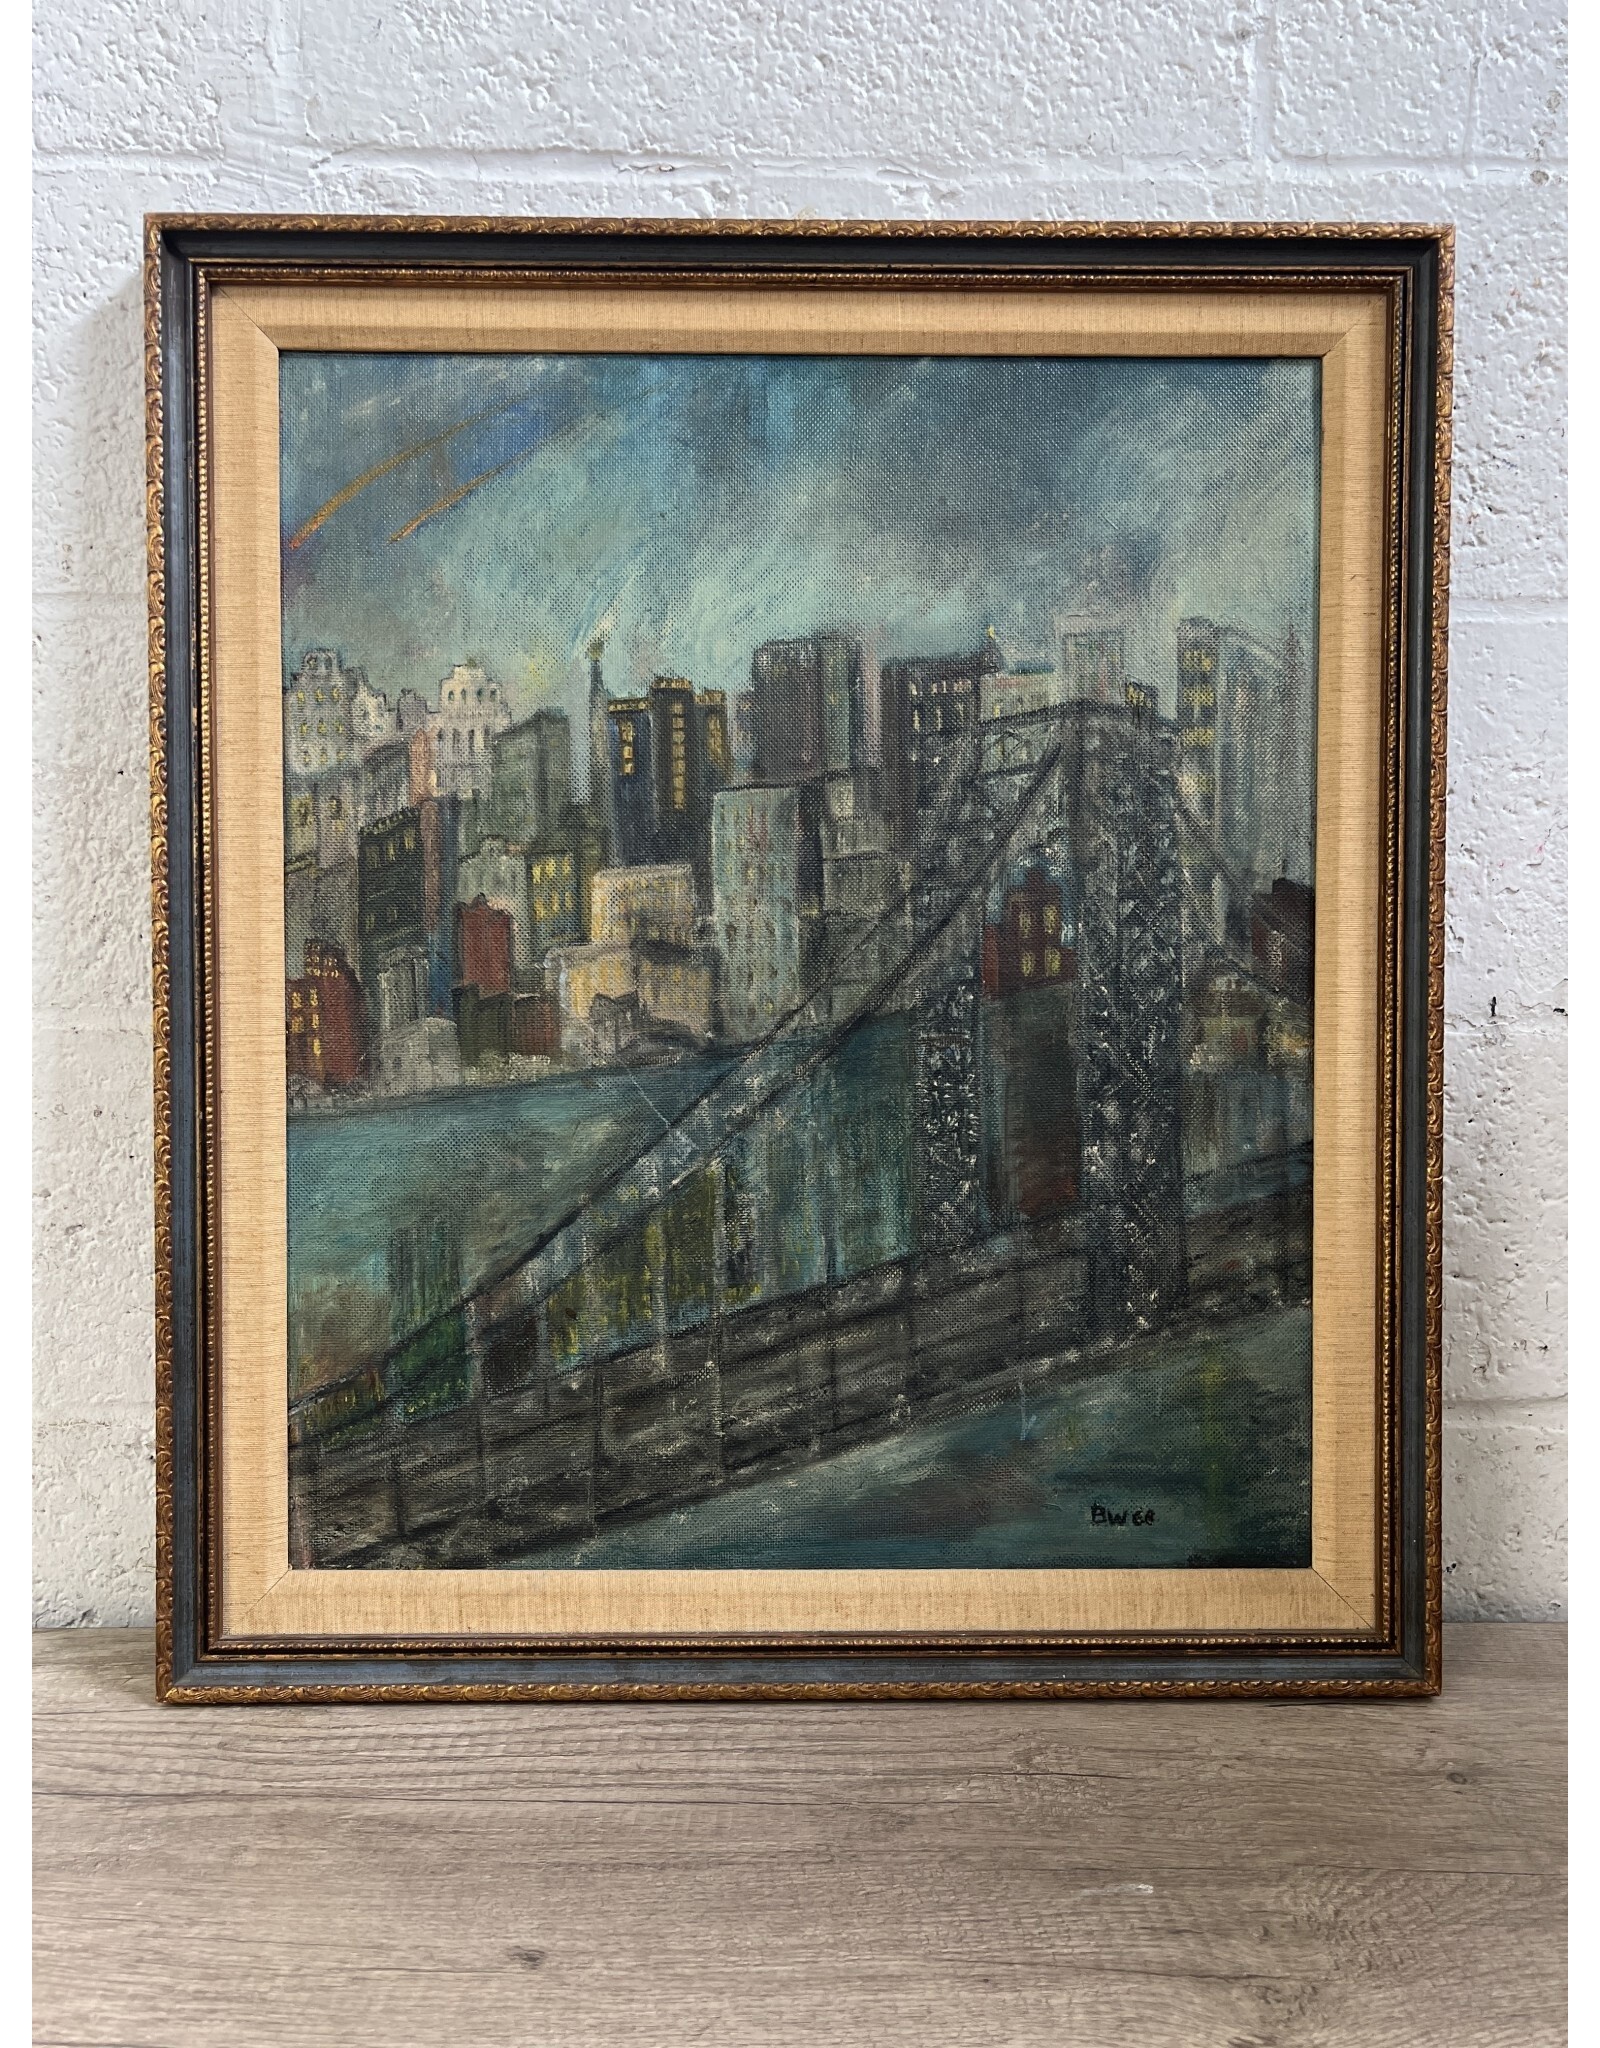 Cityscape, framed oil on canvas, sgnd BW '68